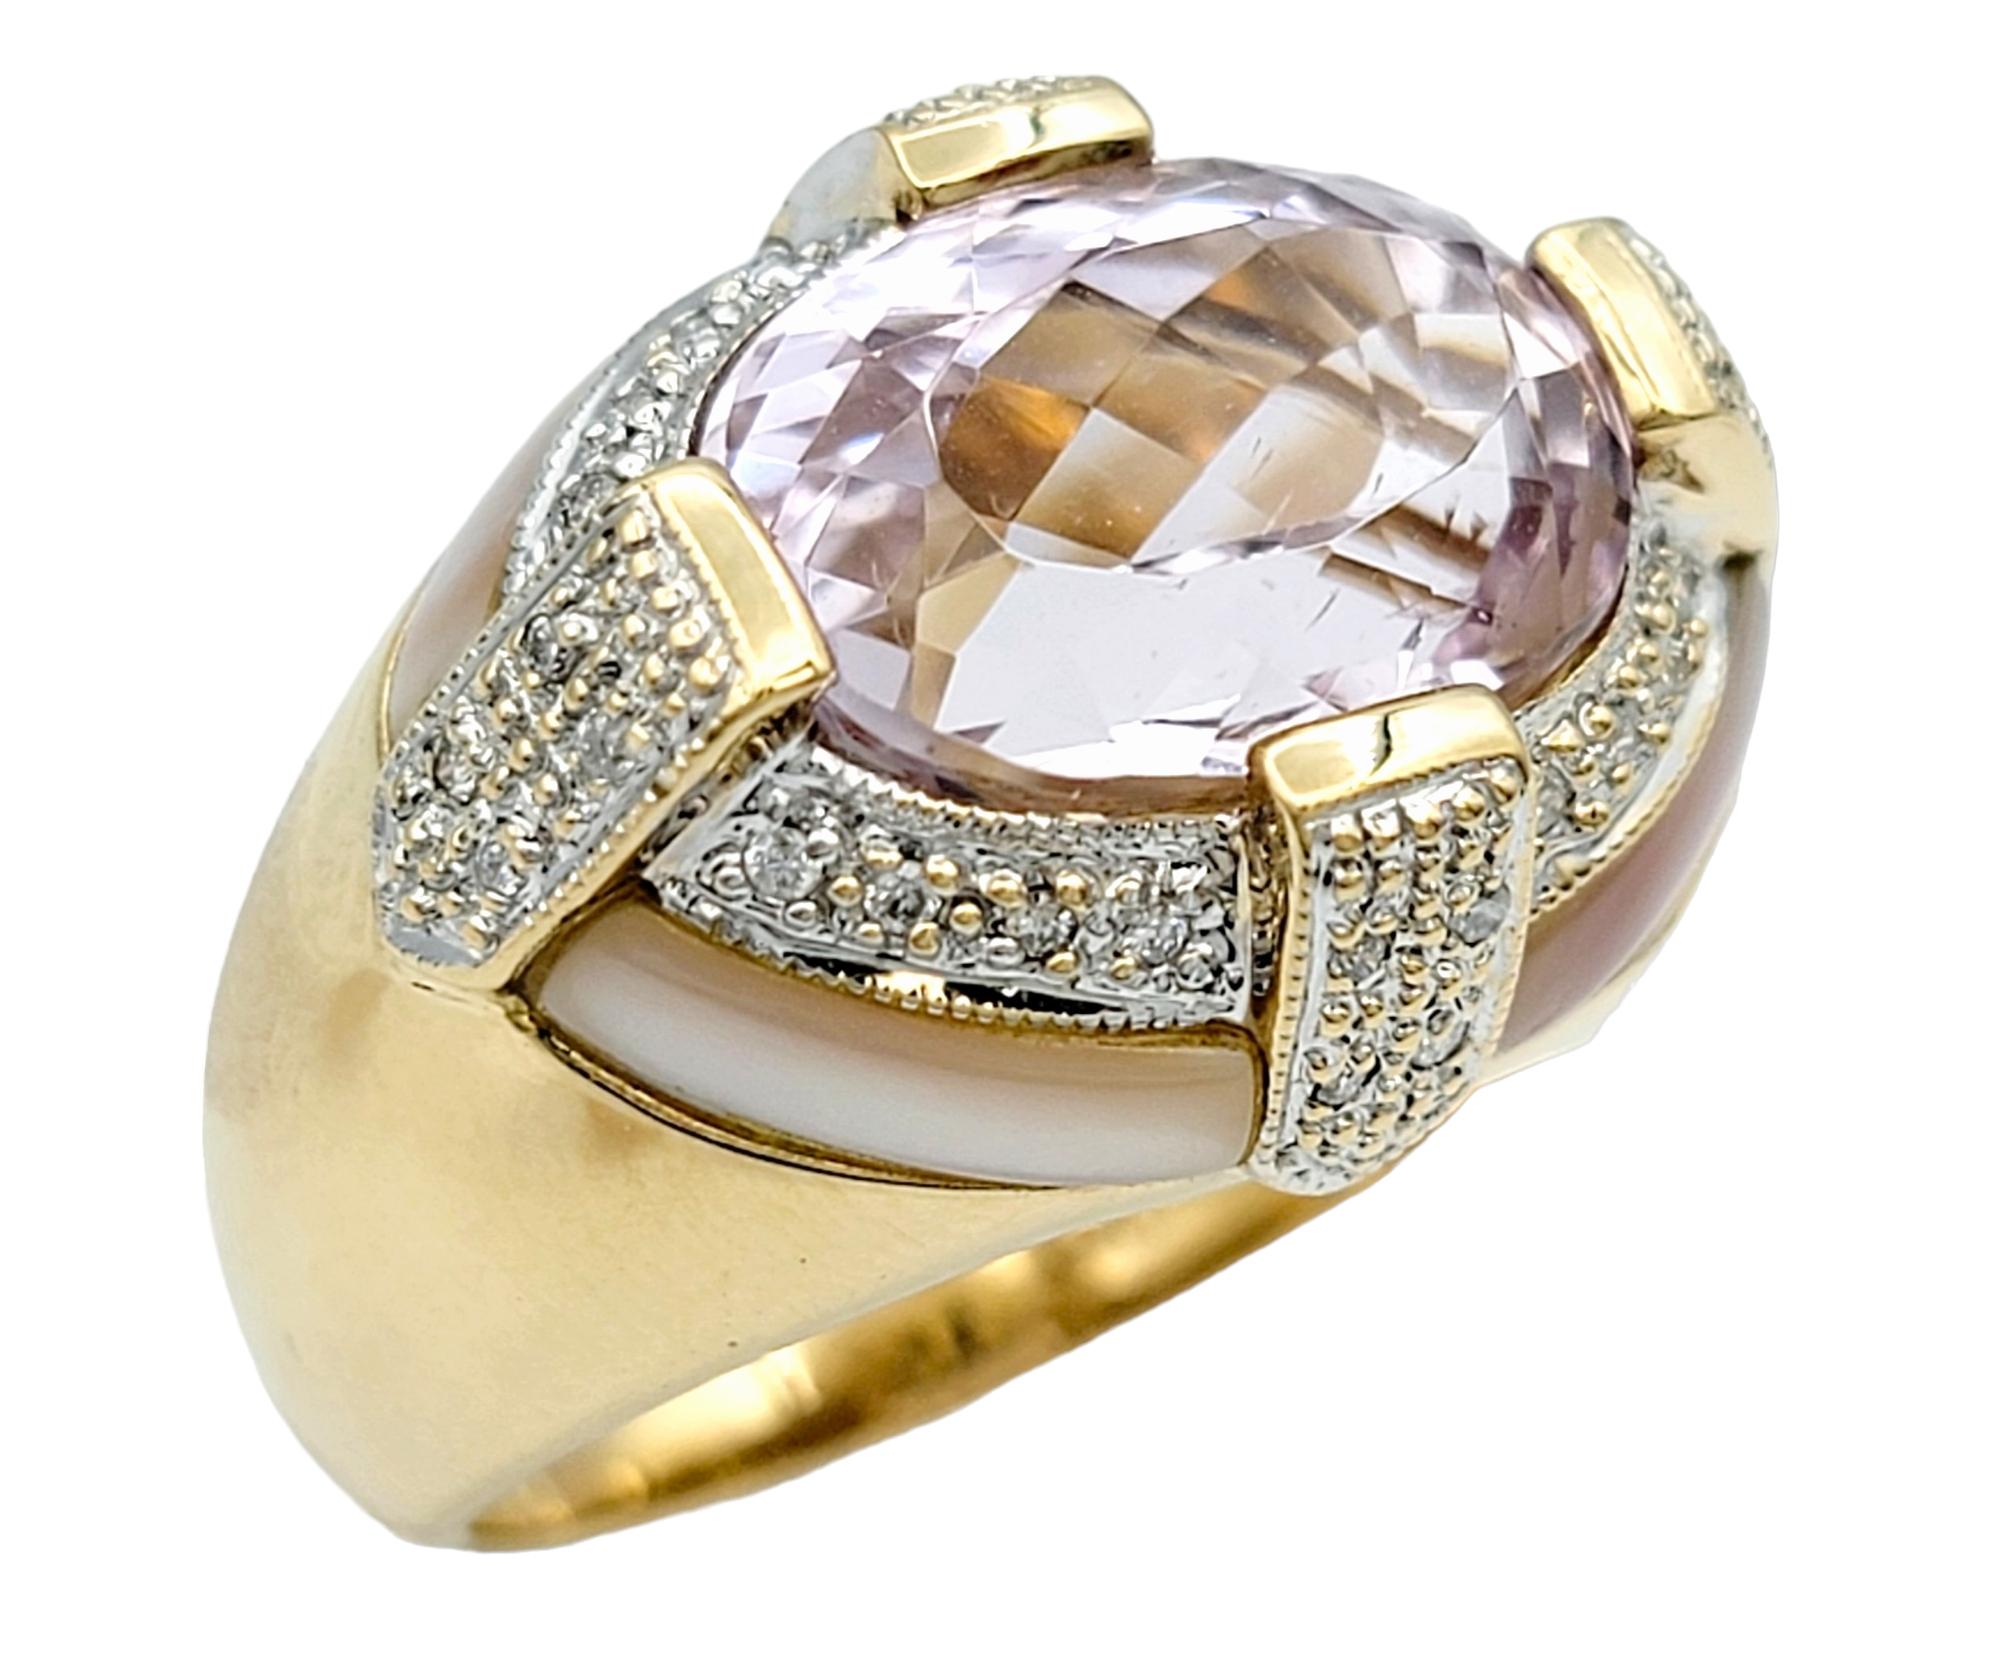 Oval Cut Kunzite, Diamond, and Mother of Pearl Cocktail Ring in 14 Karat Gold In Good Condition For Sale In Scottsdale, AZ